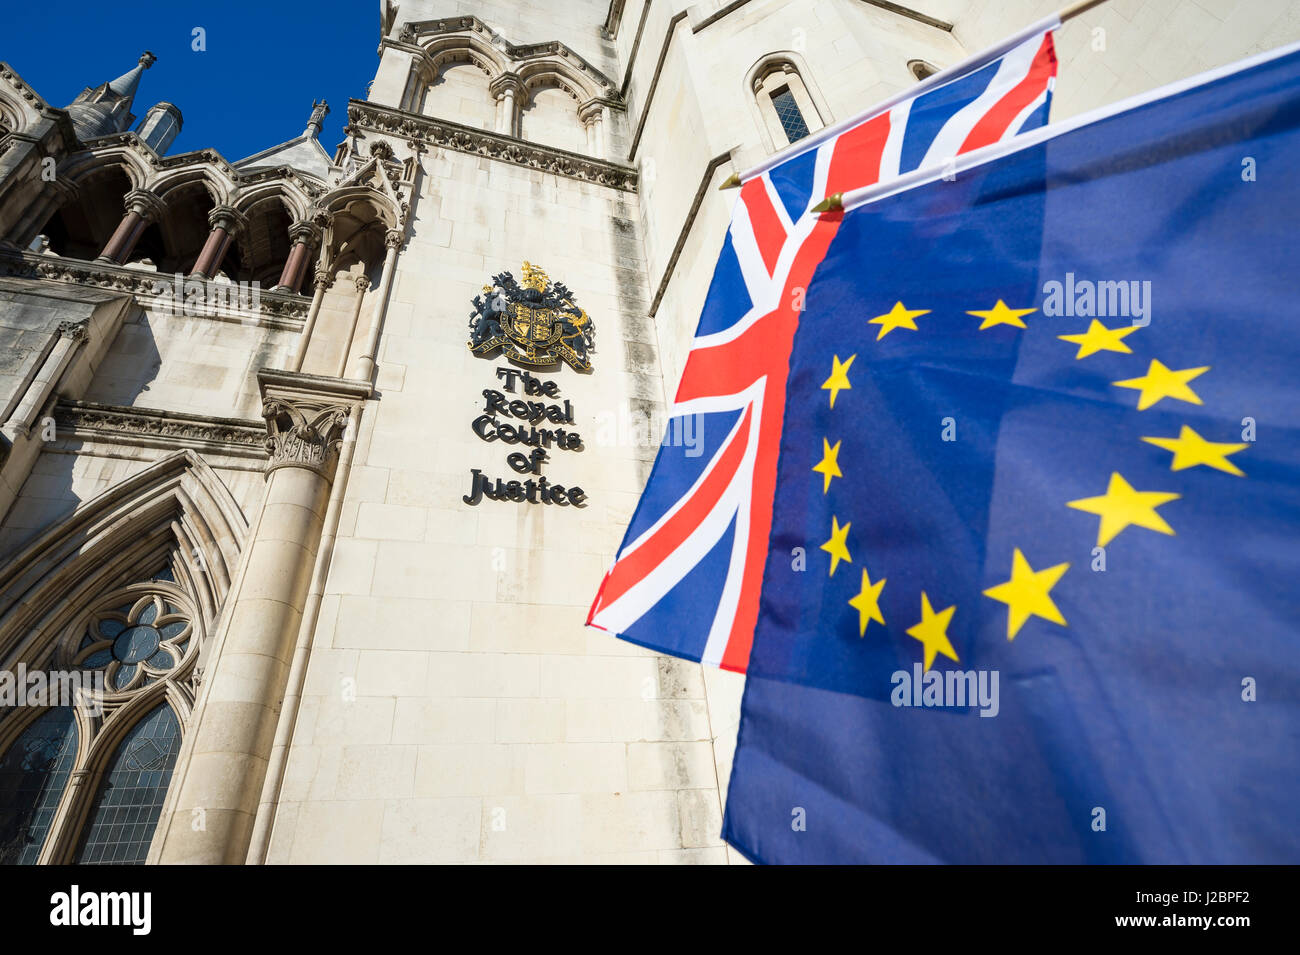 EU European Union and UK United Kingdom flags flying together in front of The Royal Courts of Justice in London, where some Brexit cases will be heard Stock Photo